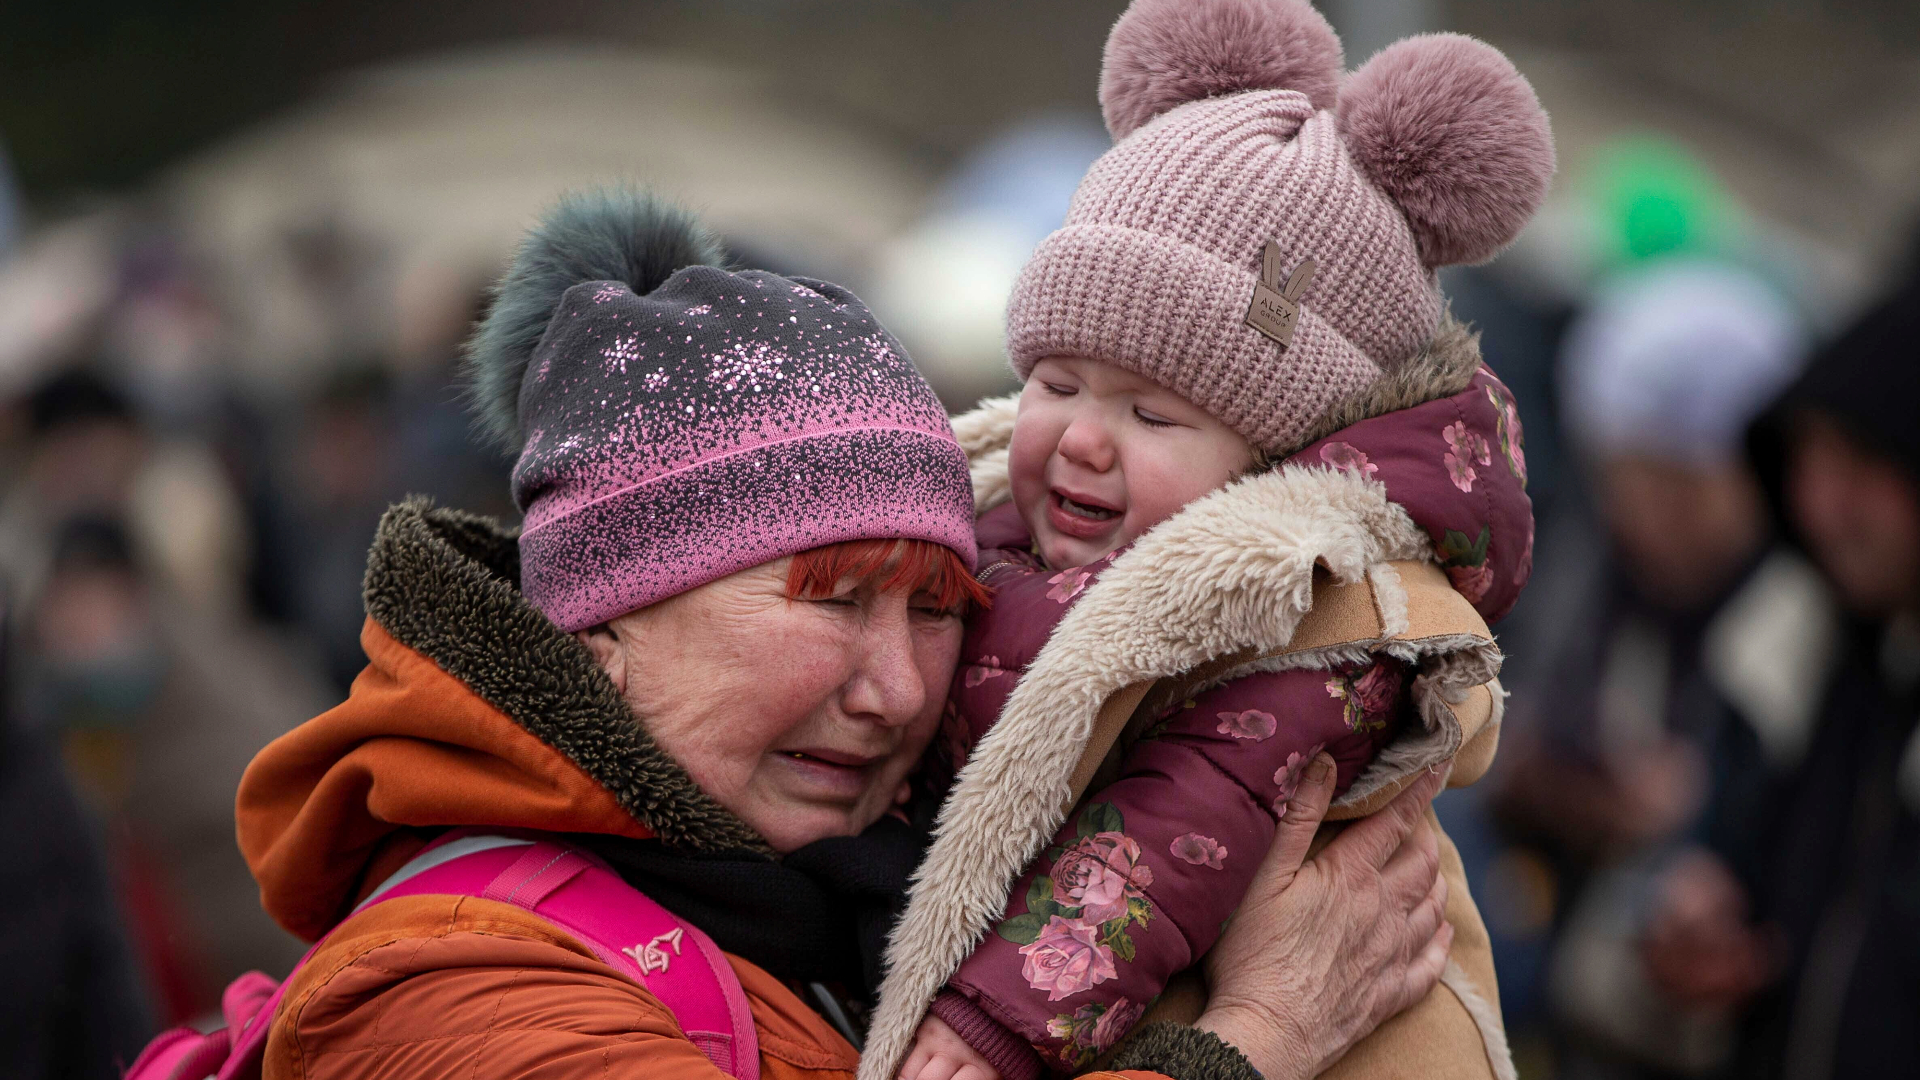 Ukrainian women and girls face increased risk of abuse and healthcare emergencies ITV News pic